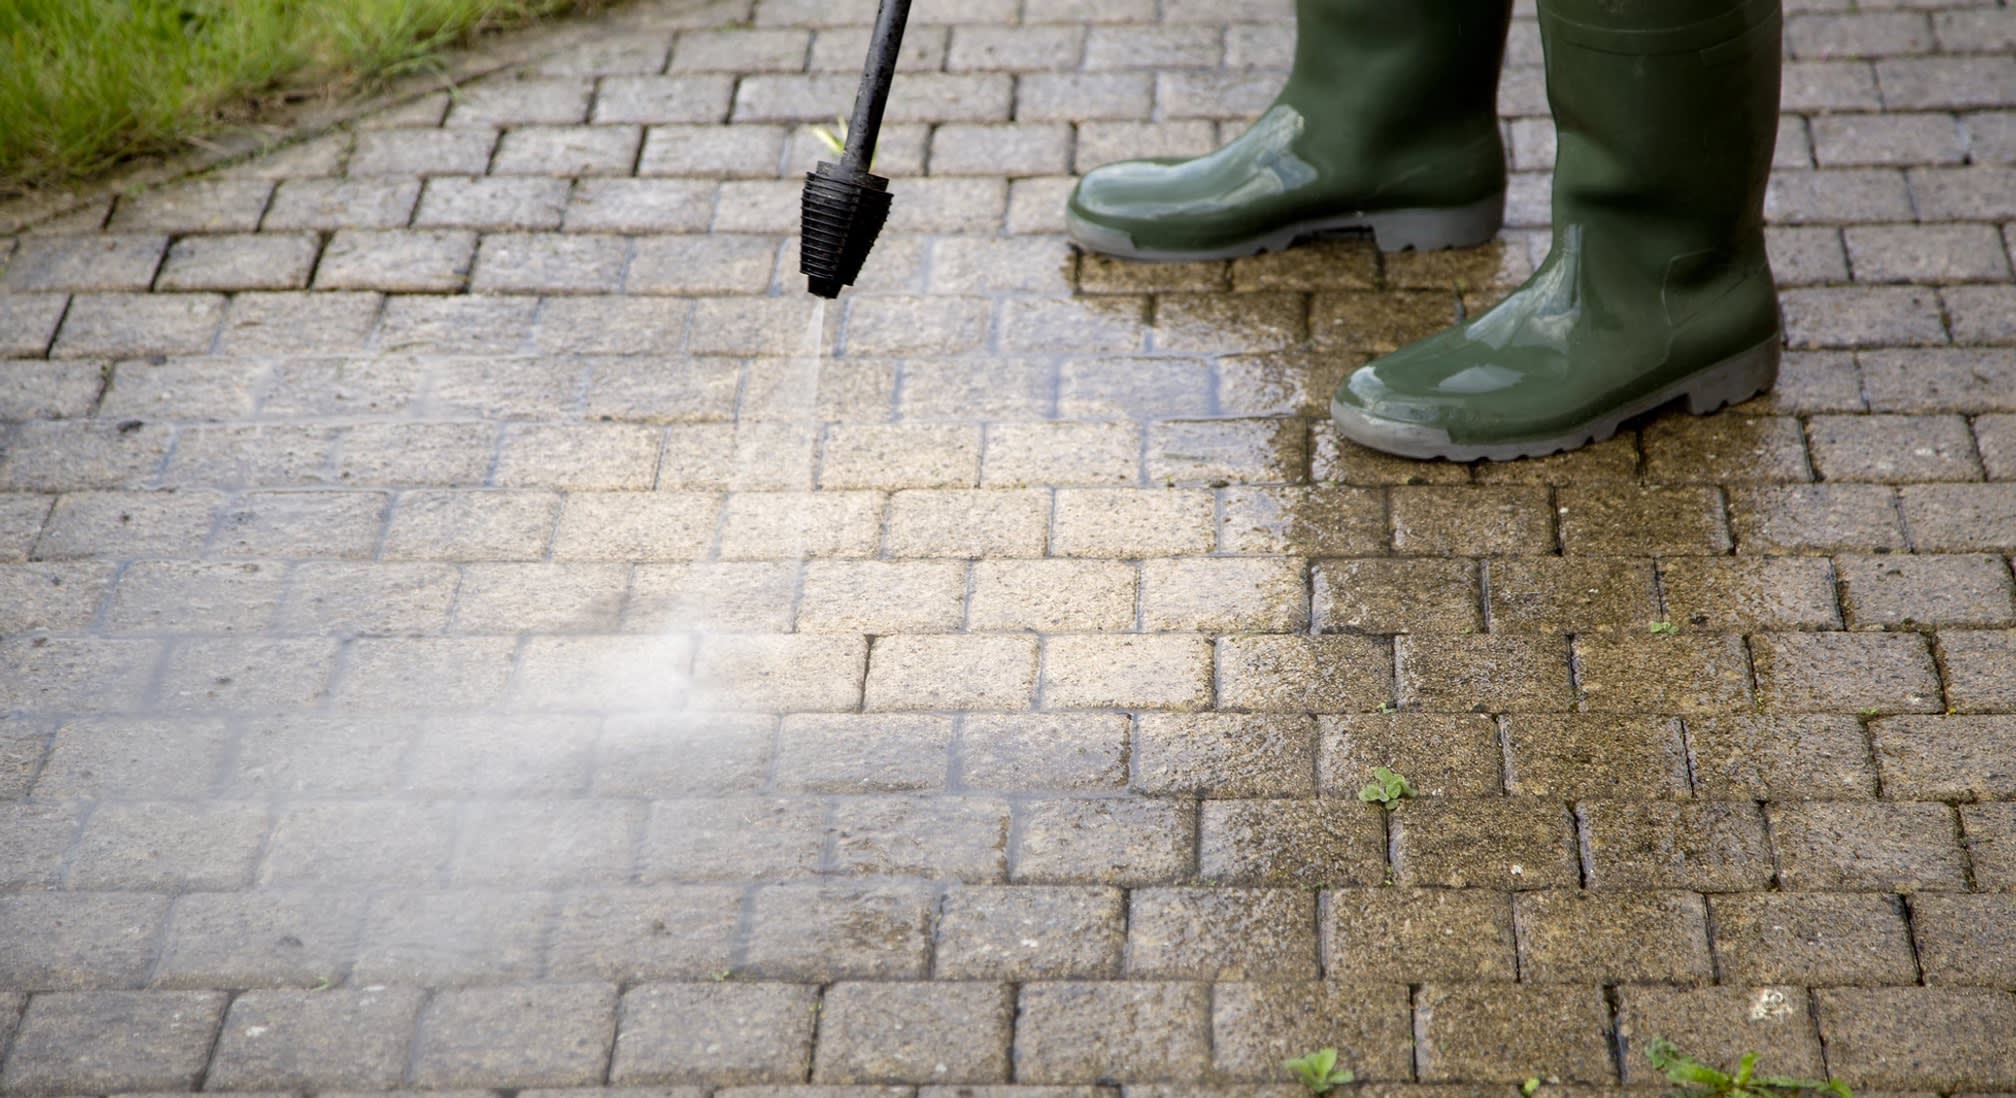 Images Johnson's Driveways and Gutter Cleaning